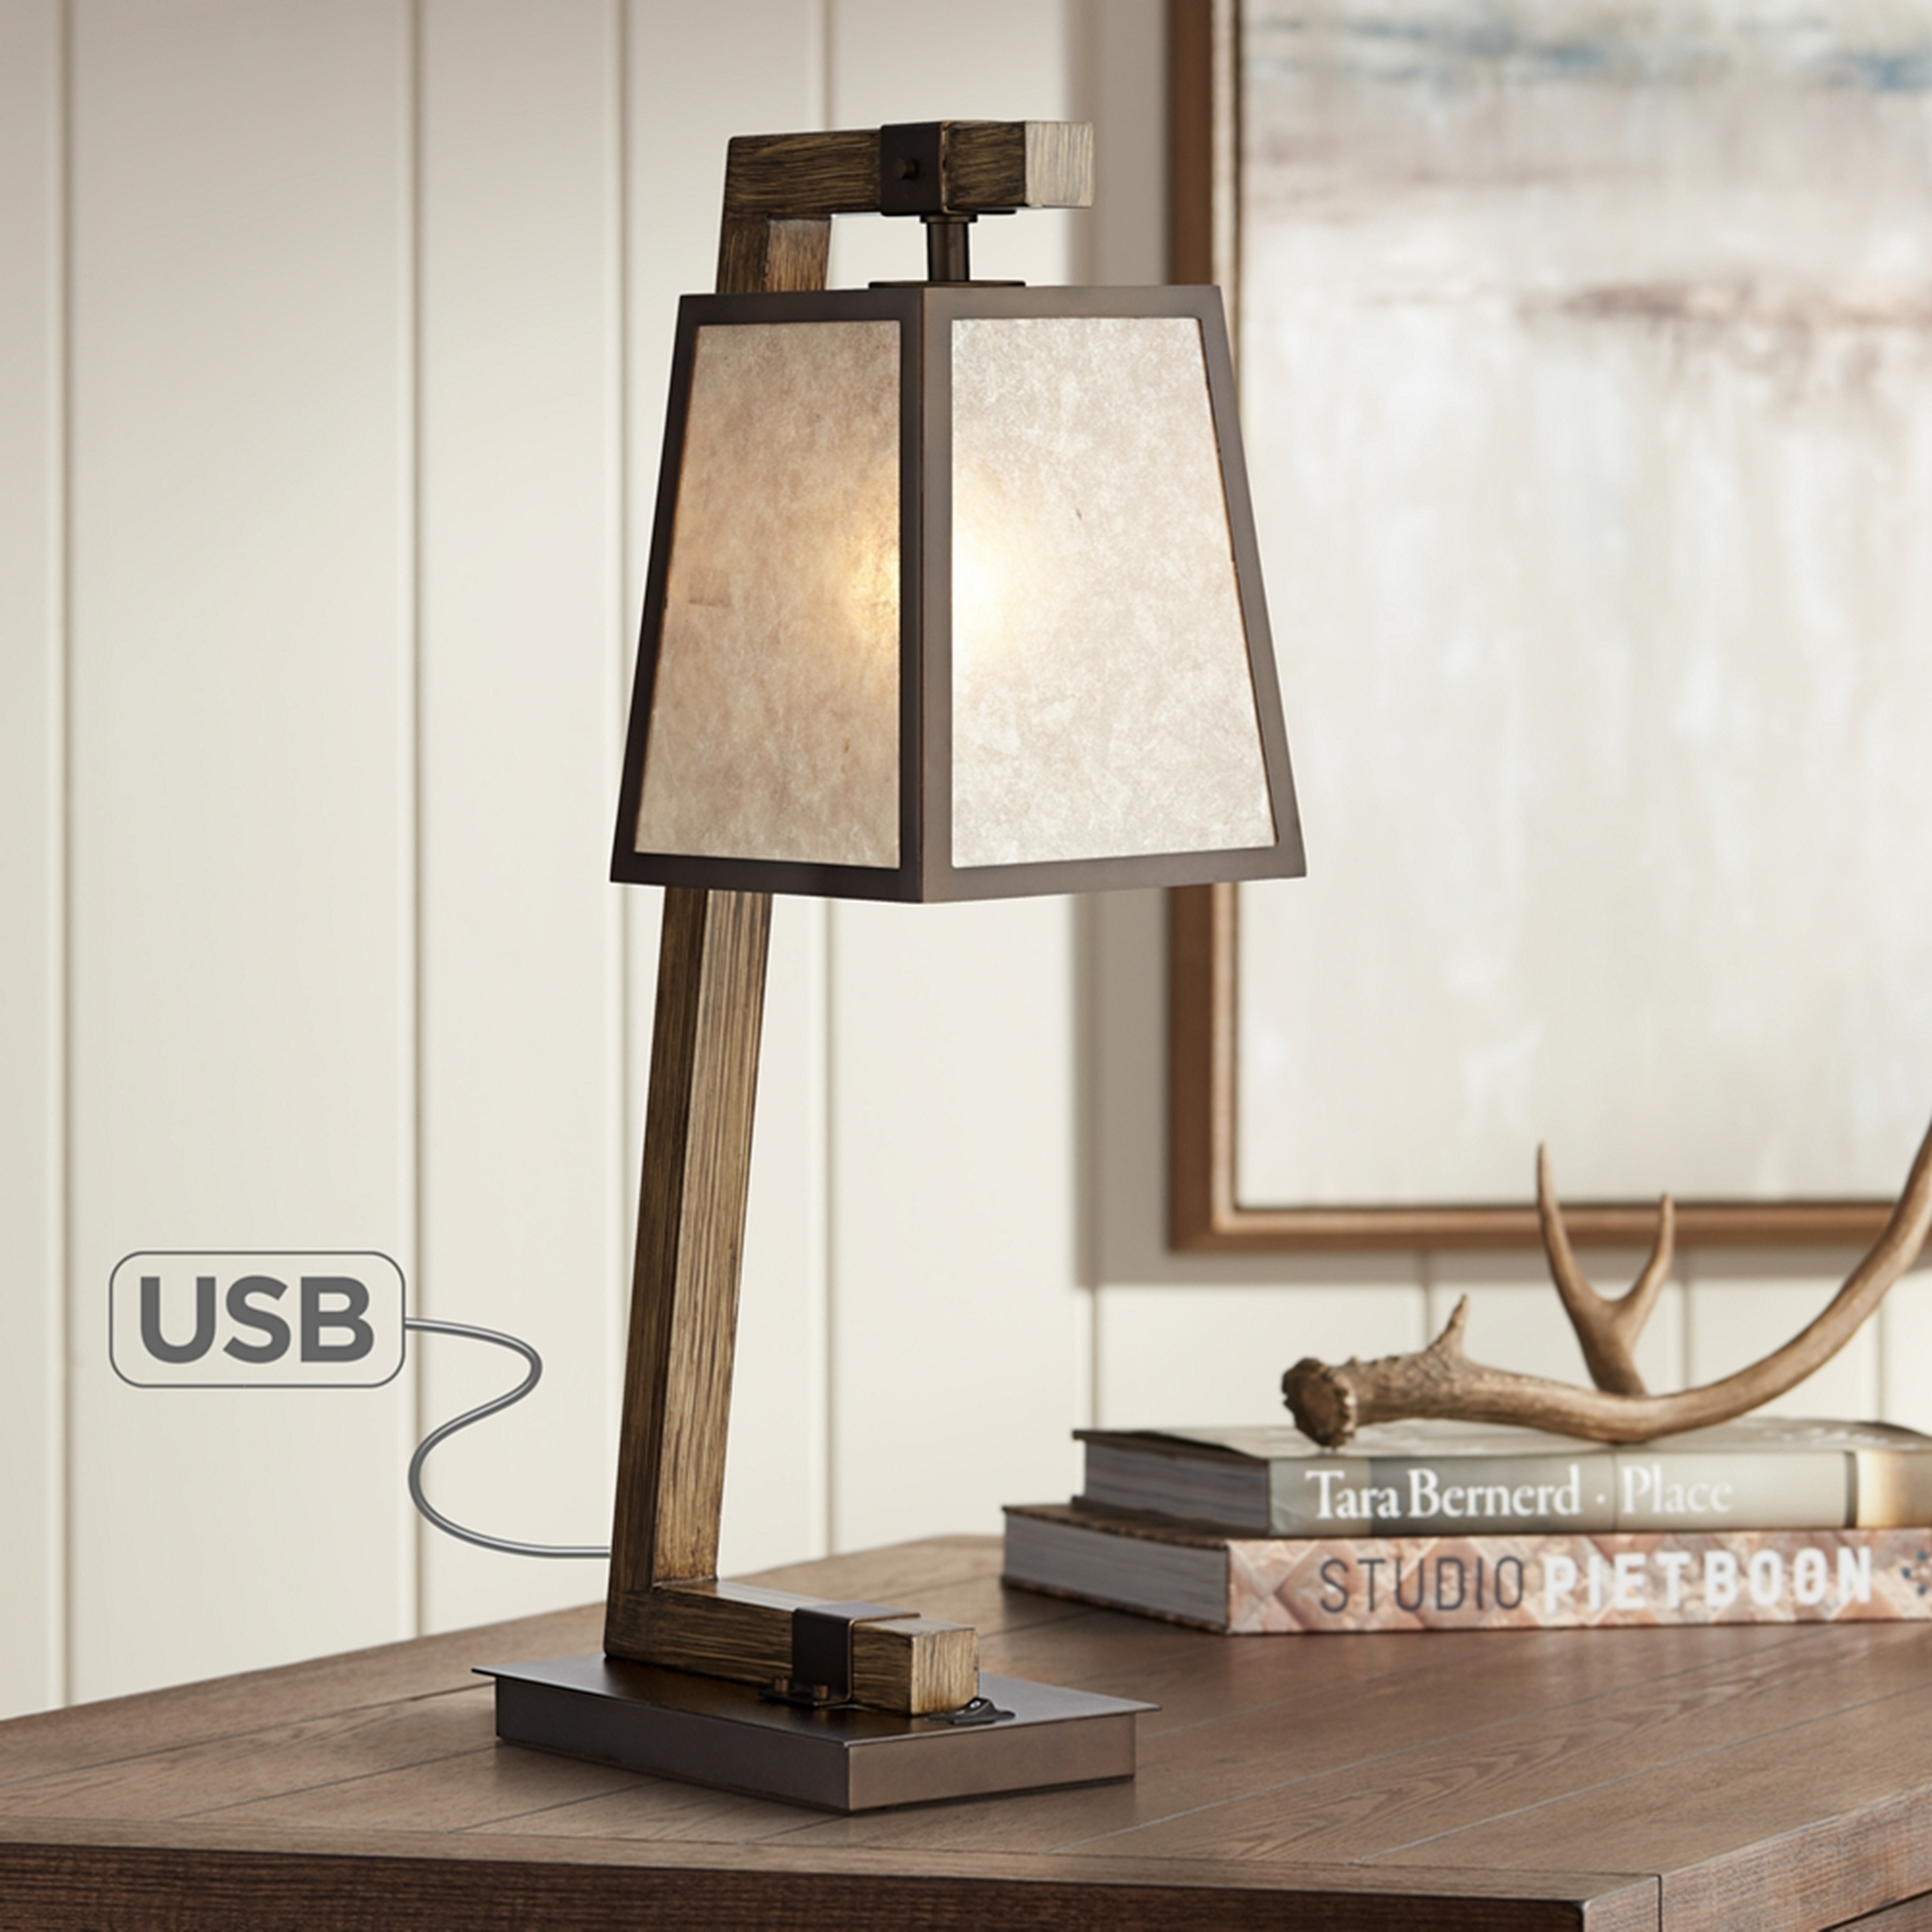 Tribeca Mica Shade Metal Table Lamp with USB Port - Style # 53X31 - Lamps Plus